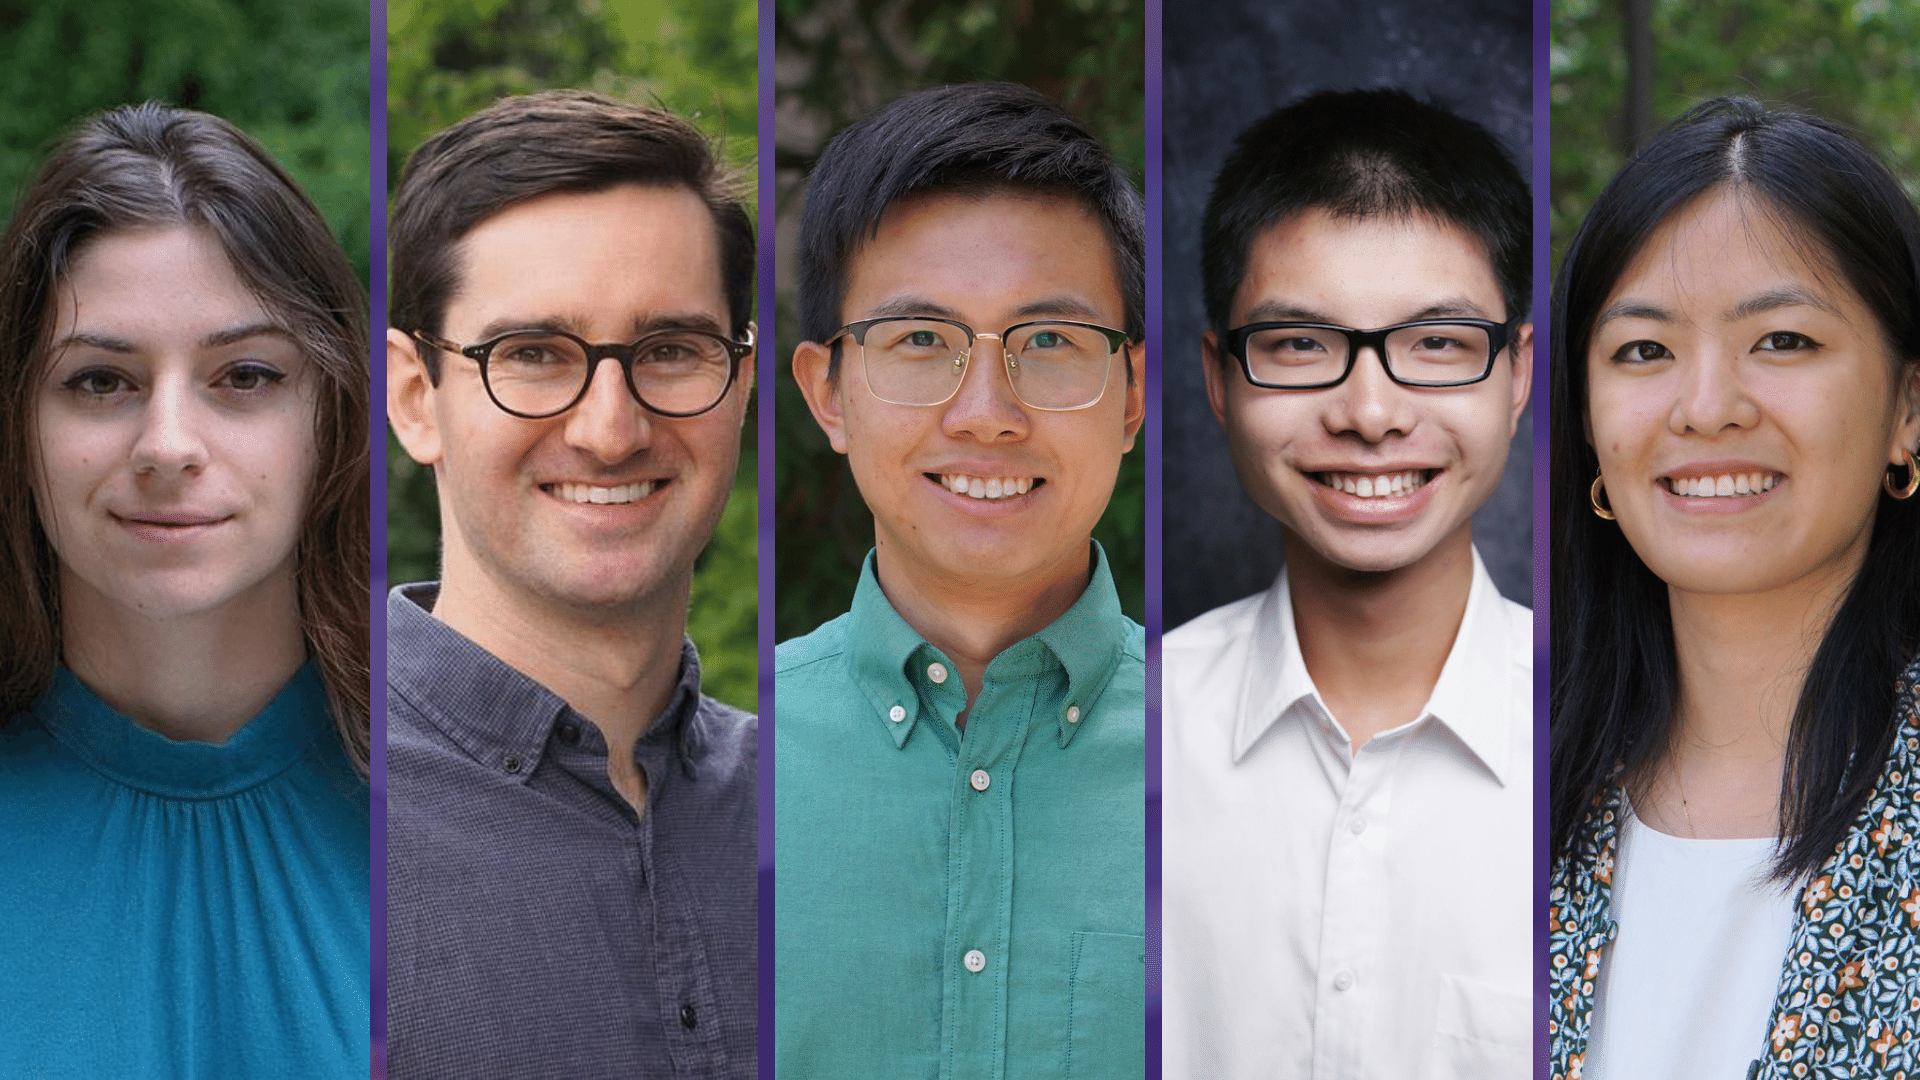 Photo collage of five students: Emerman, Keating, Li, Chen, and Zhang